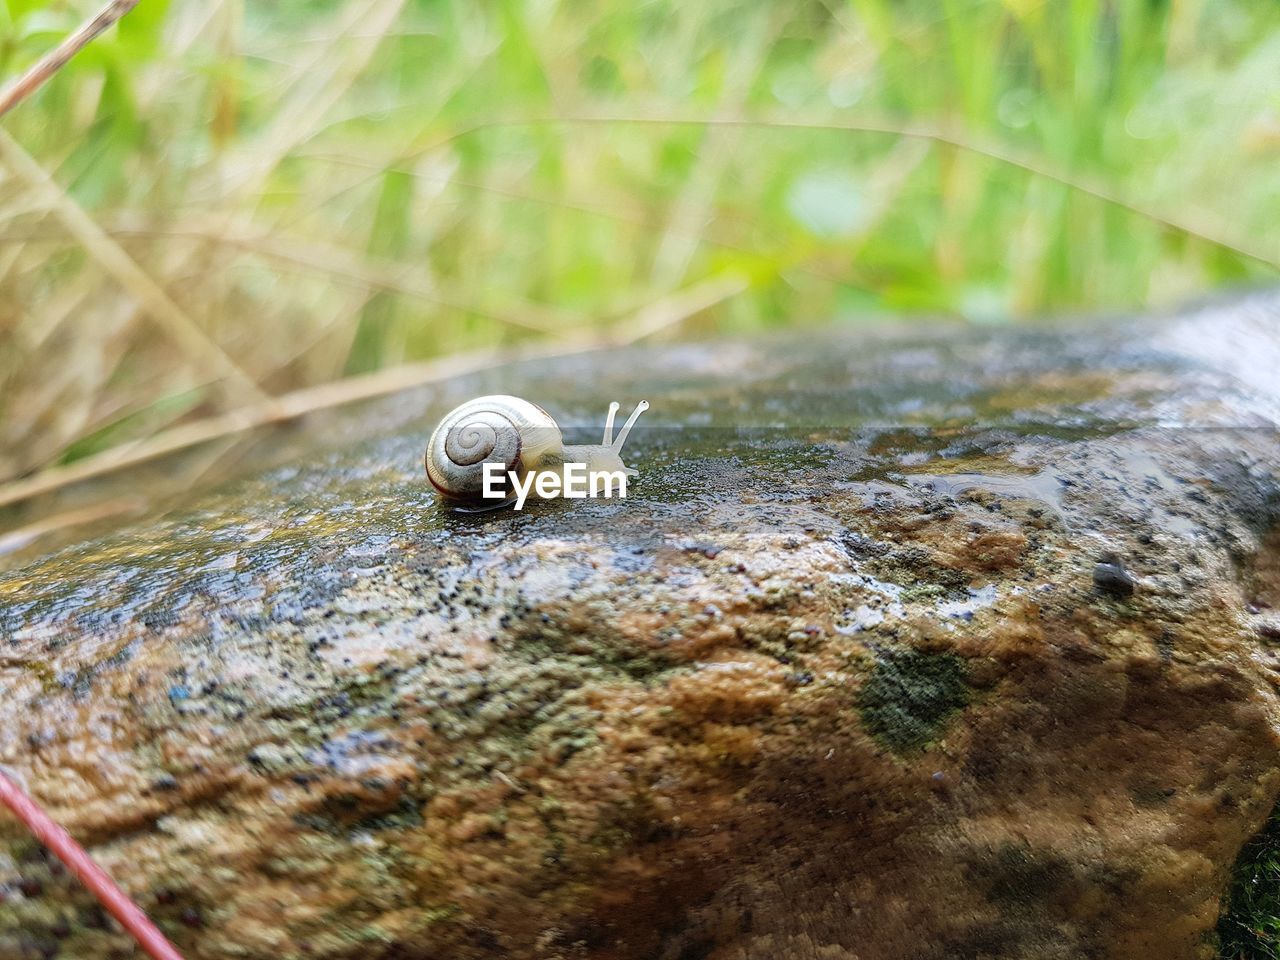 CLOSE UP OF SNAIL ON ROCK